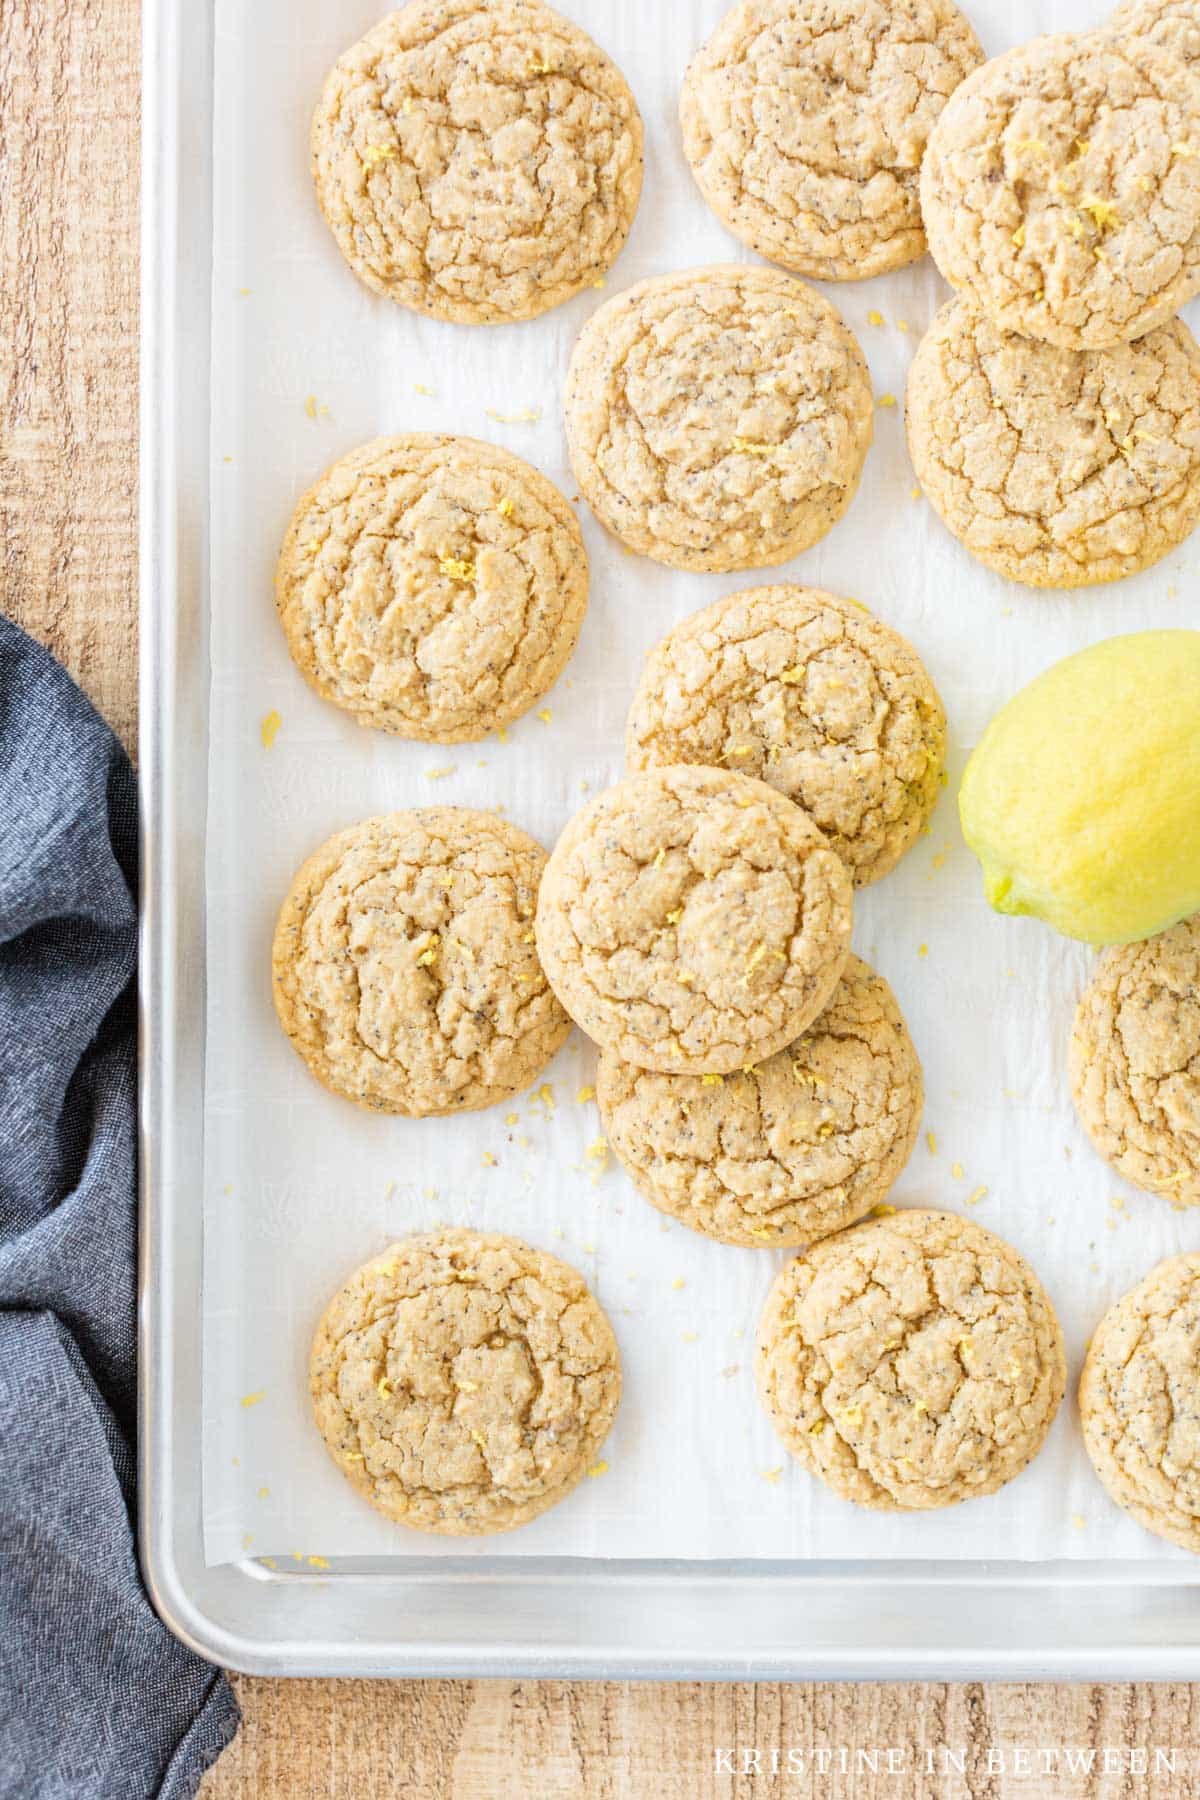 Lemon poppy seed cookies on a baking sheet with a lemon and a blue napkin next to them.